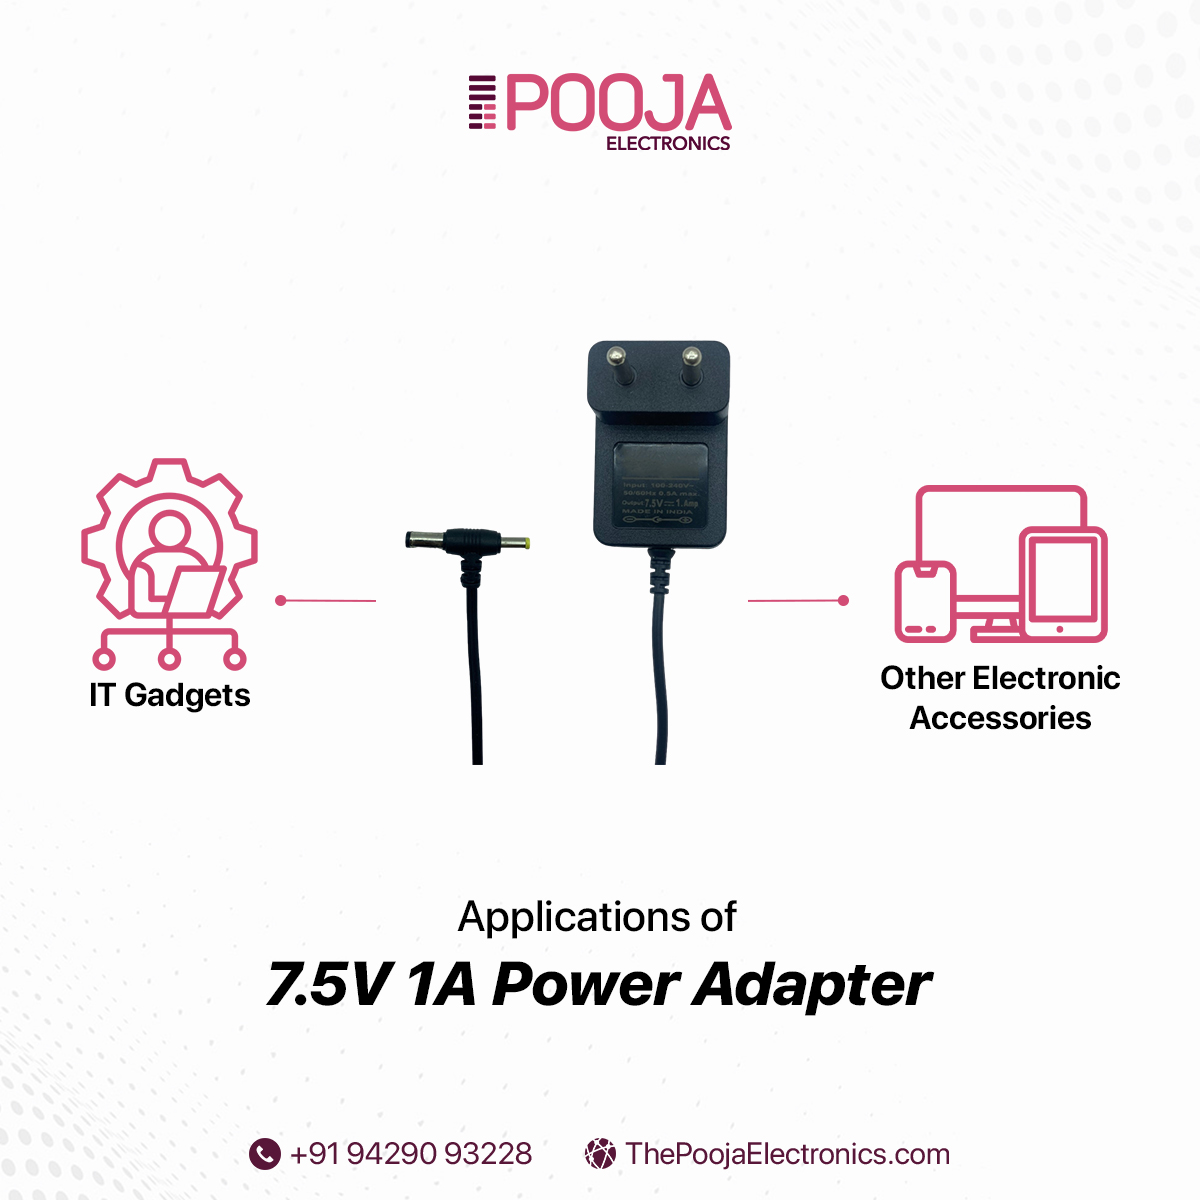 Power your devices with peace of mind! Pooja Electronics 7.5V 1A Power Adapter is engineered for performance and built to last.
.
#poojaelectronics #PowerWithPeaceOfMind #ContinuousPower #StayConnected #acremote #caraudioremote #SeamlessConnectivity #DigitalEntertainment